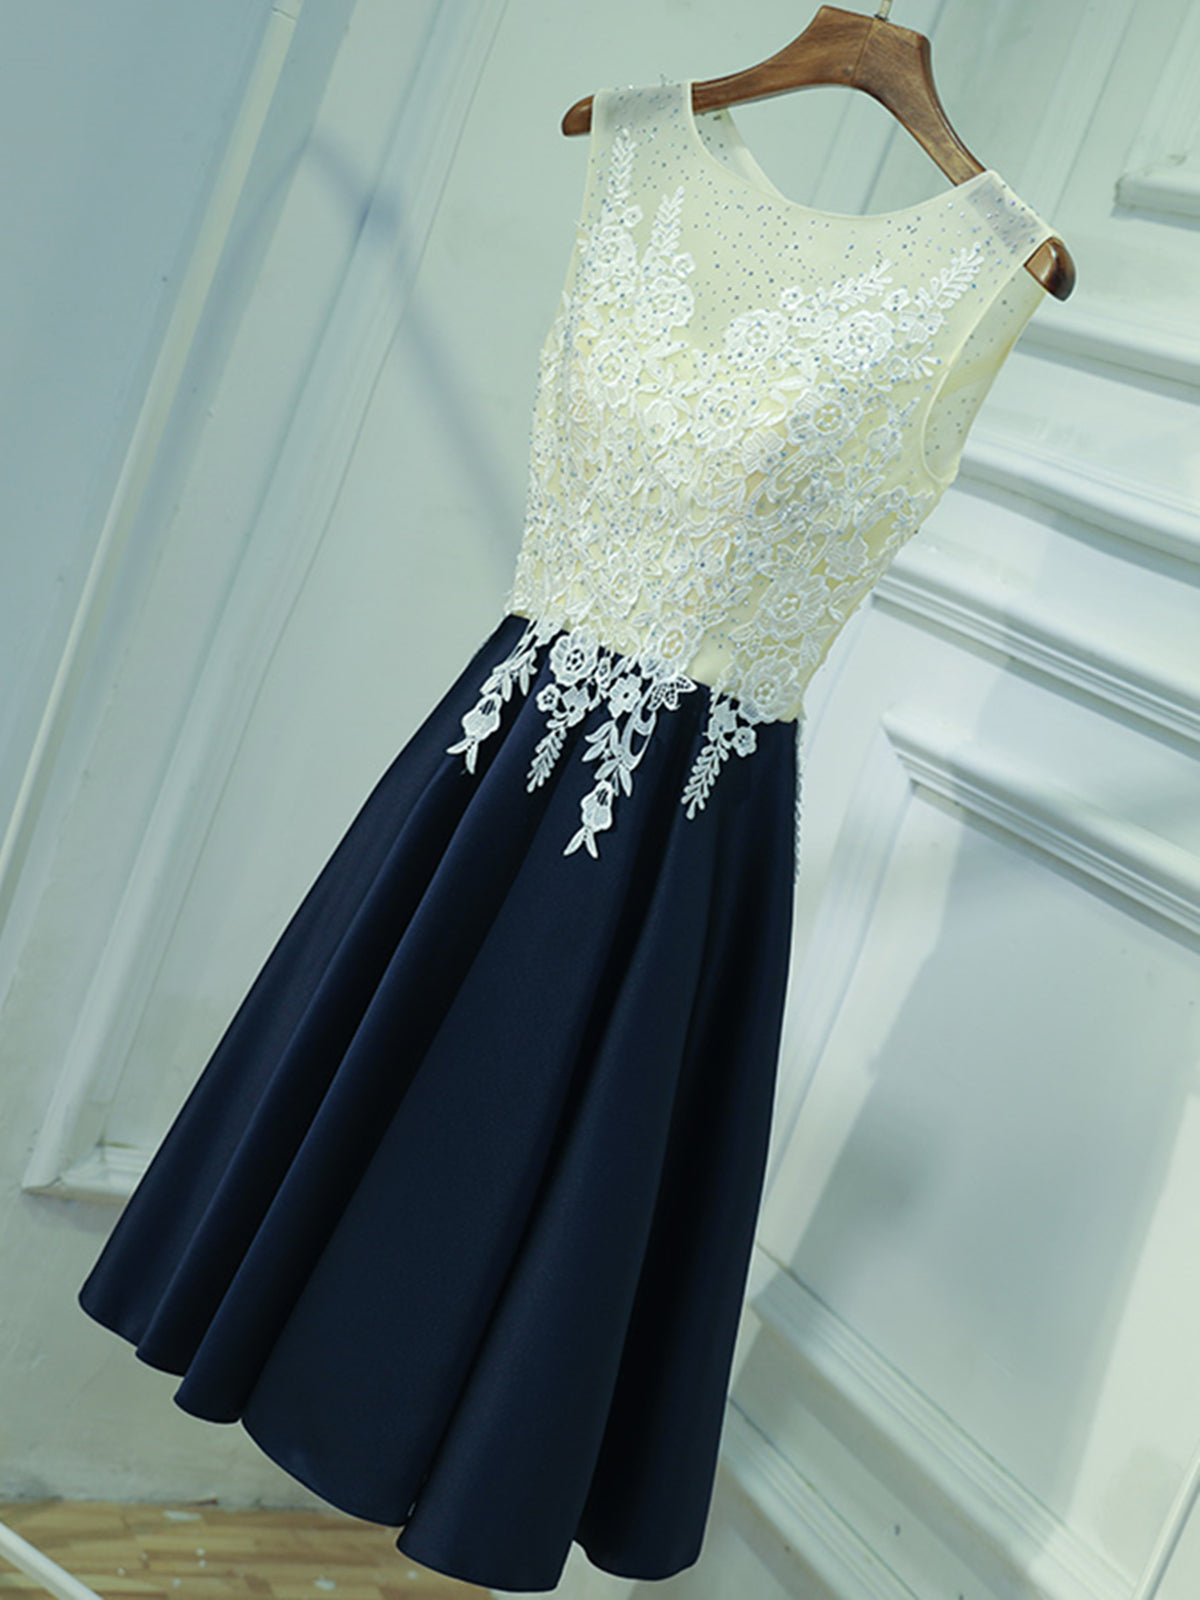 Party Dress Shops, A Line Round Neck Short Lace Prom Dresses, Navy Blue Short Lace Formal Homecoming Dresses